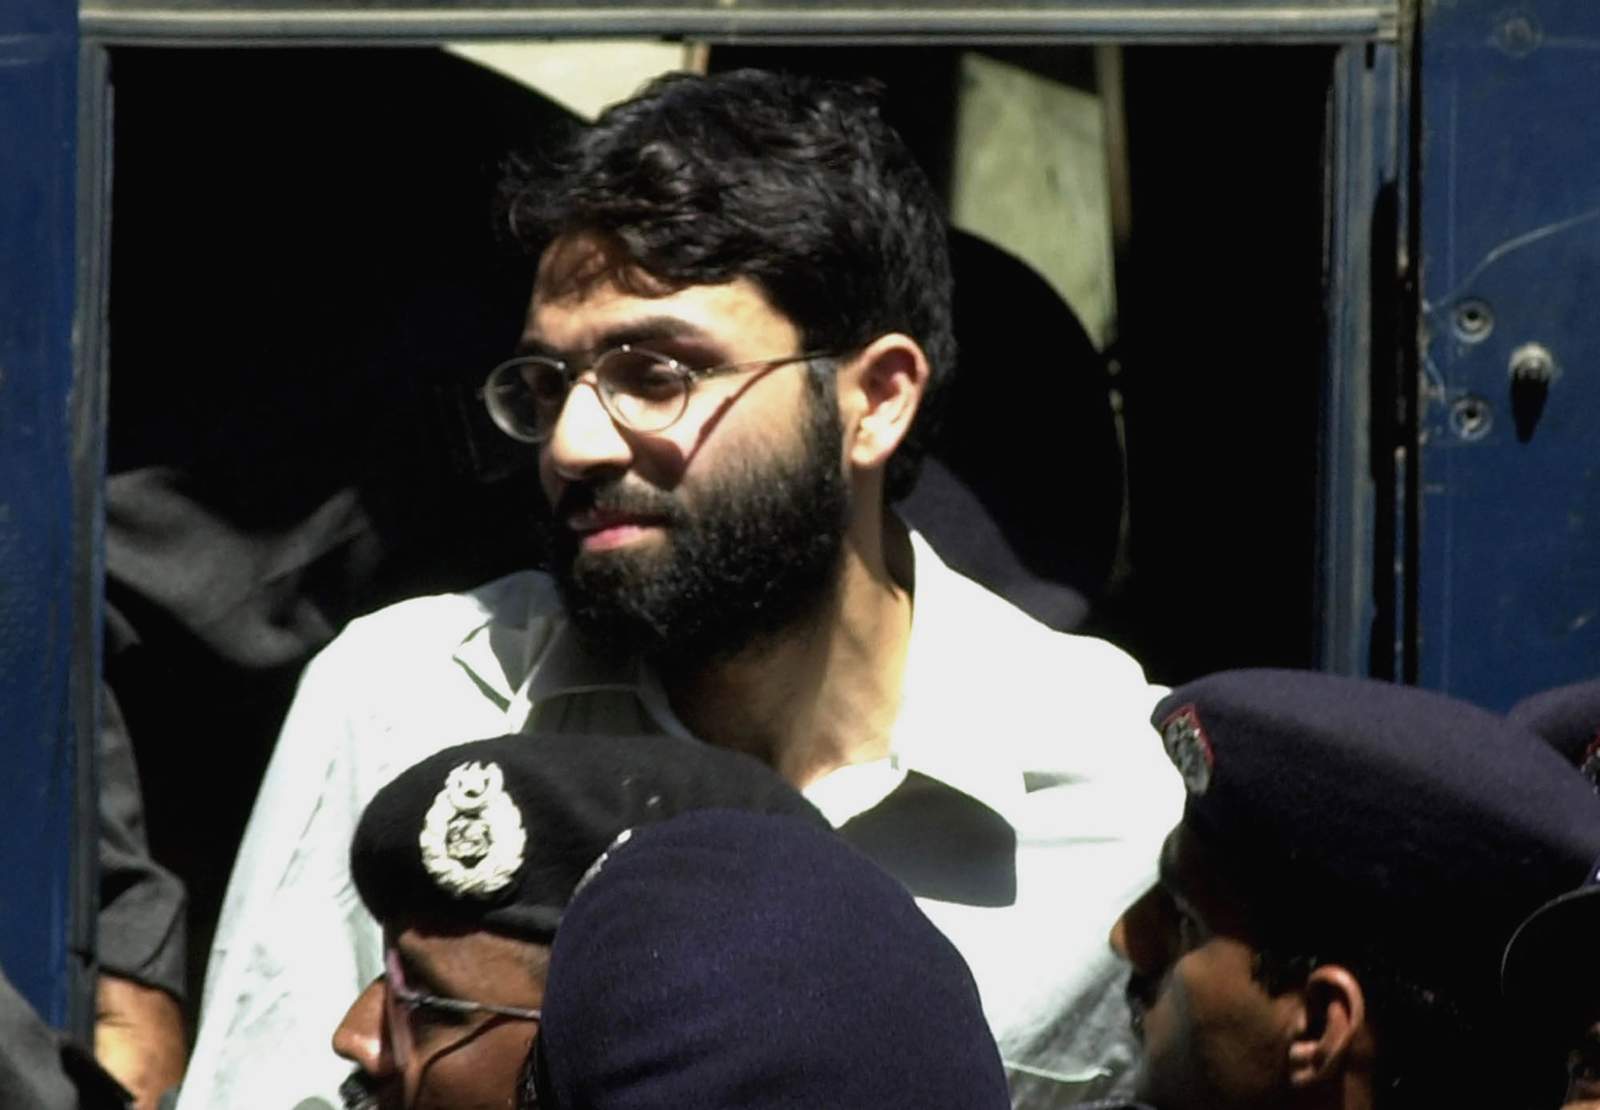 Court orders release of man charged in Daniel Pearl killing